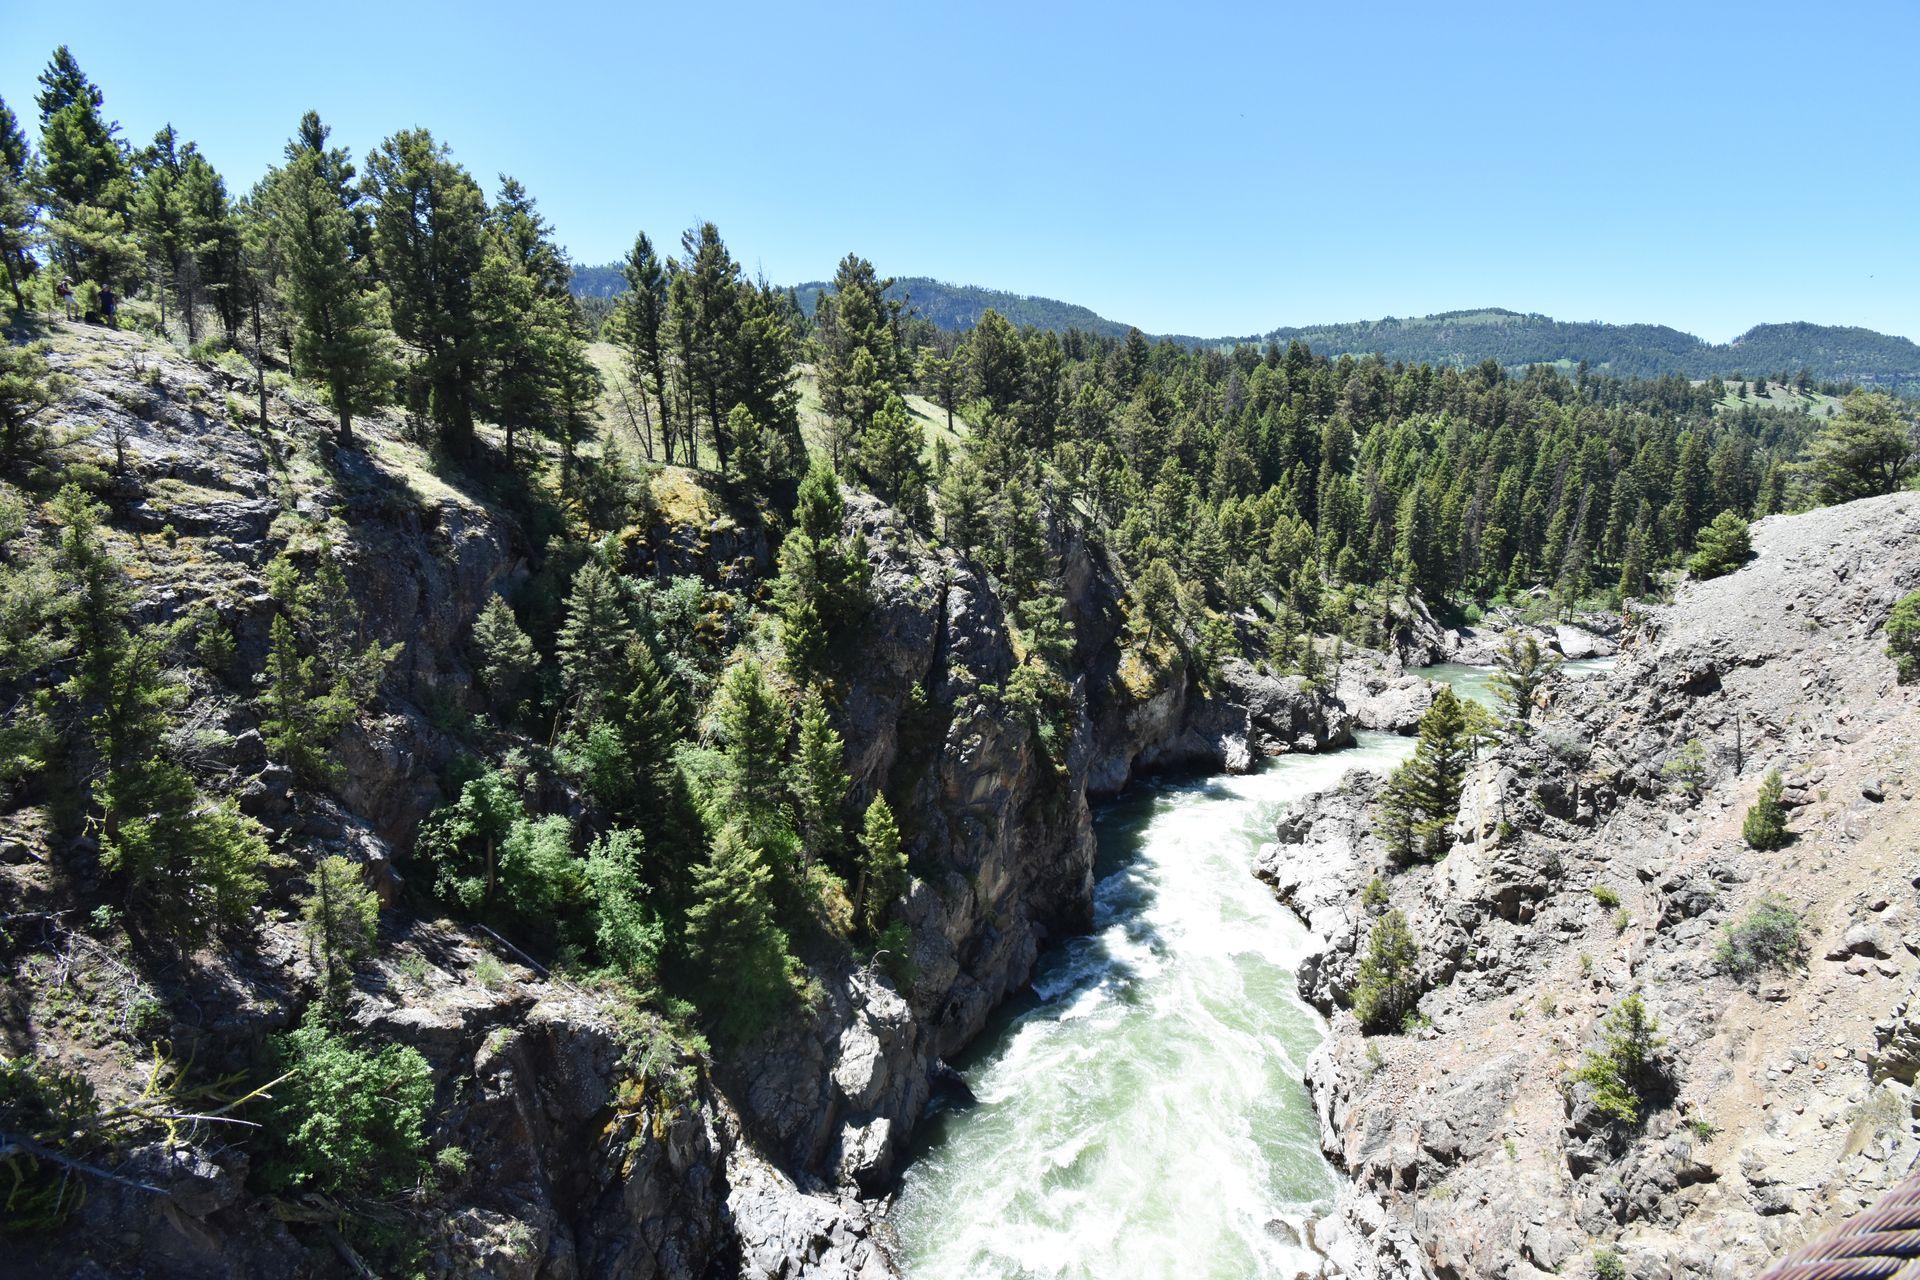 Looking down at the Hellroaring River, which is flowing with white rapids. There are several pine trees on the shore.